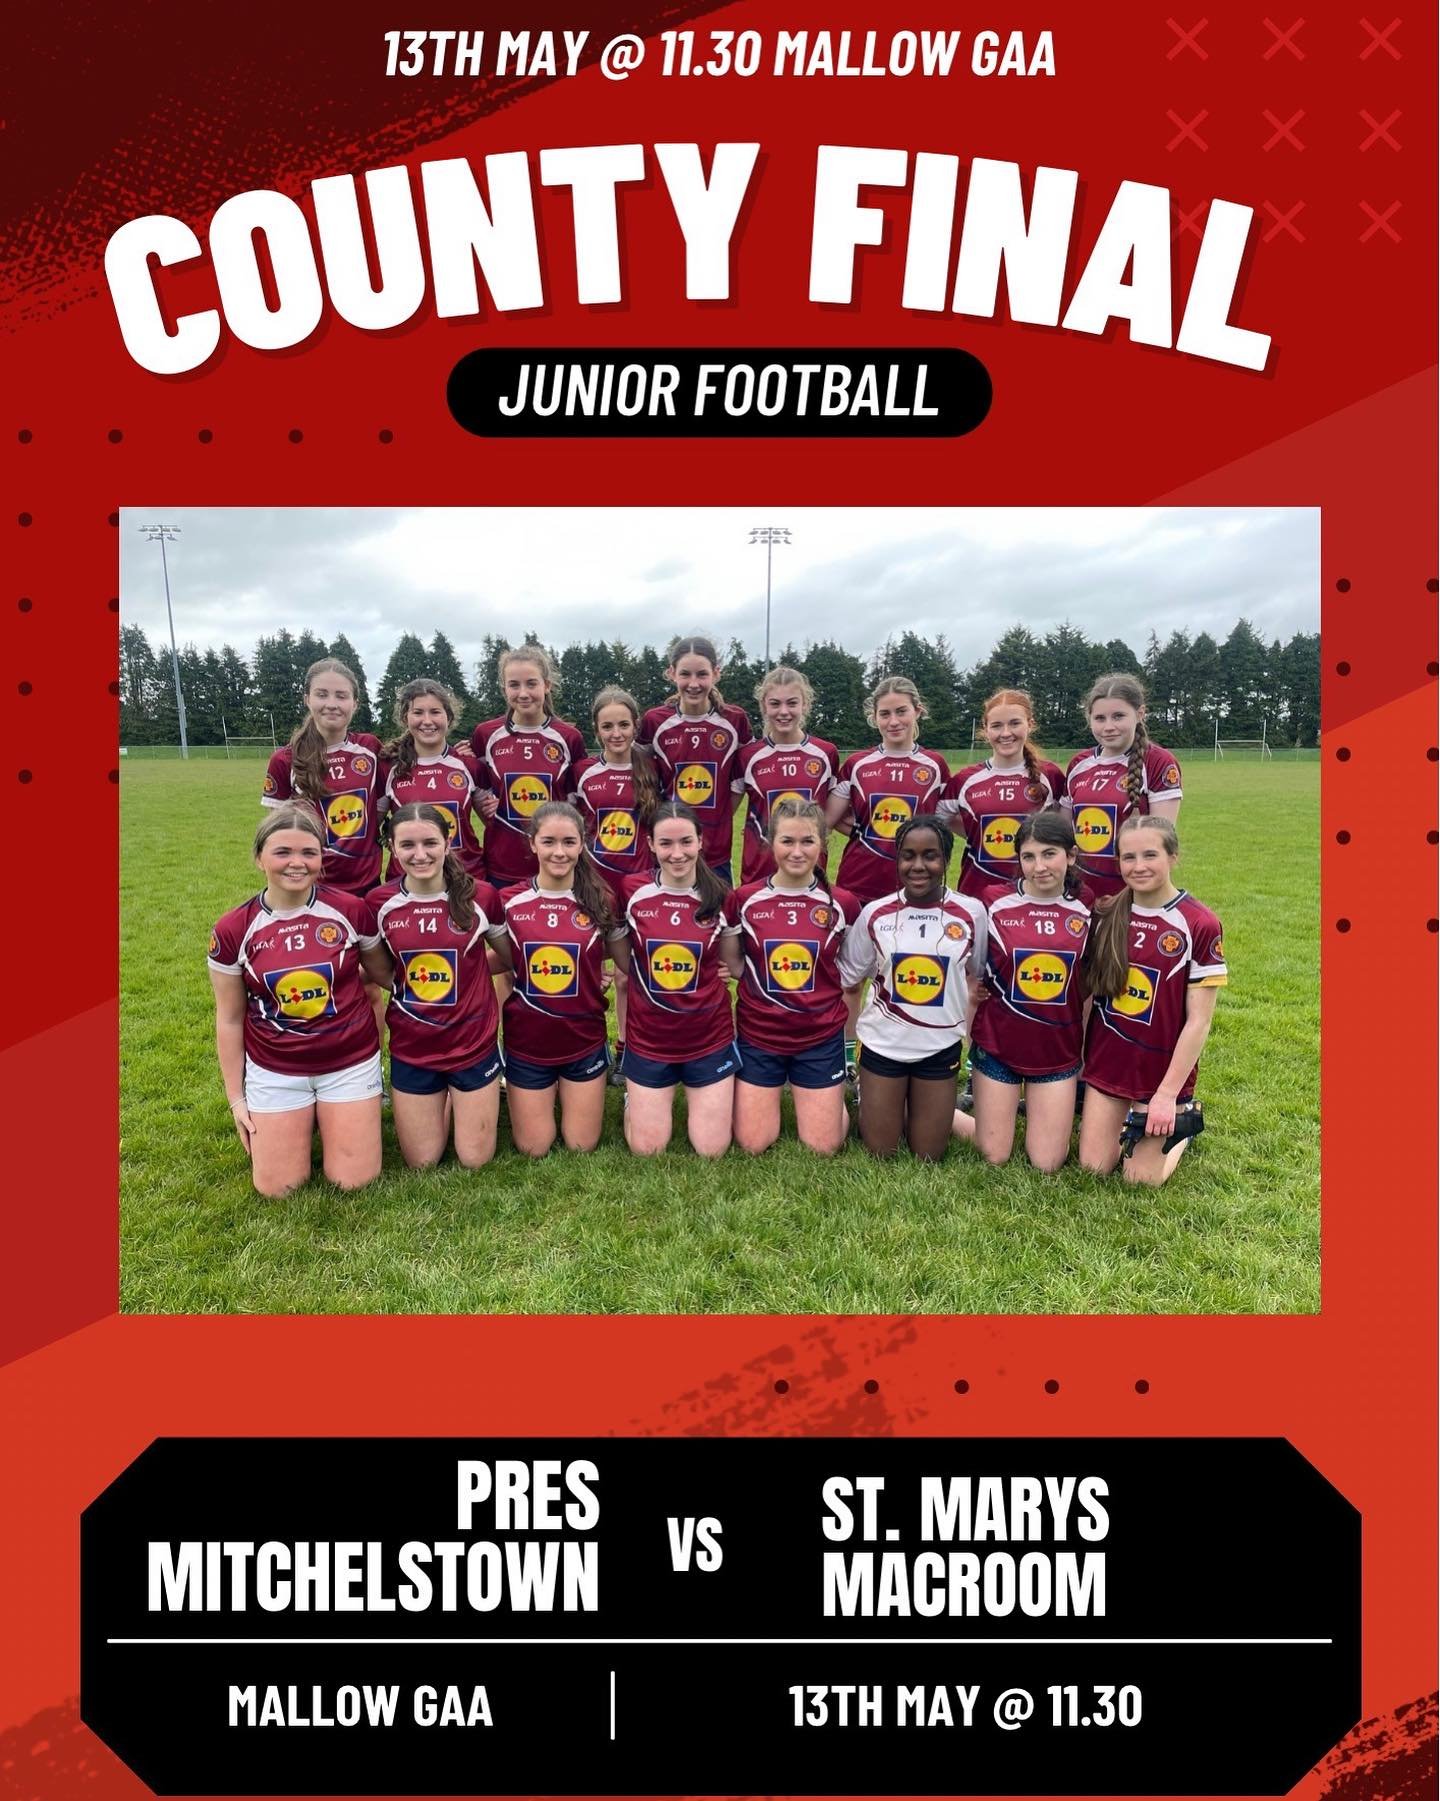 🏆🏐County finals week 🏐🏆 
Big week for our school football teams this week as we hope to add the minor win from last week. 
Our juniors getting the ball rolling tomorrow in the first of two county finals. They take on St. Mary&rsquo;s Macroom in M